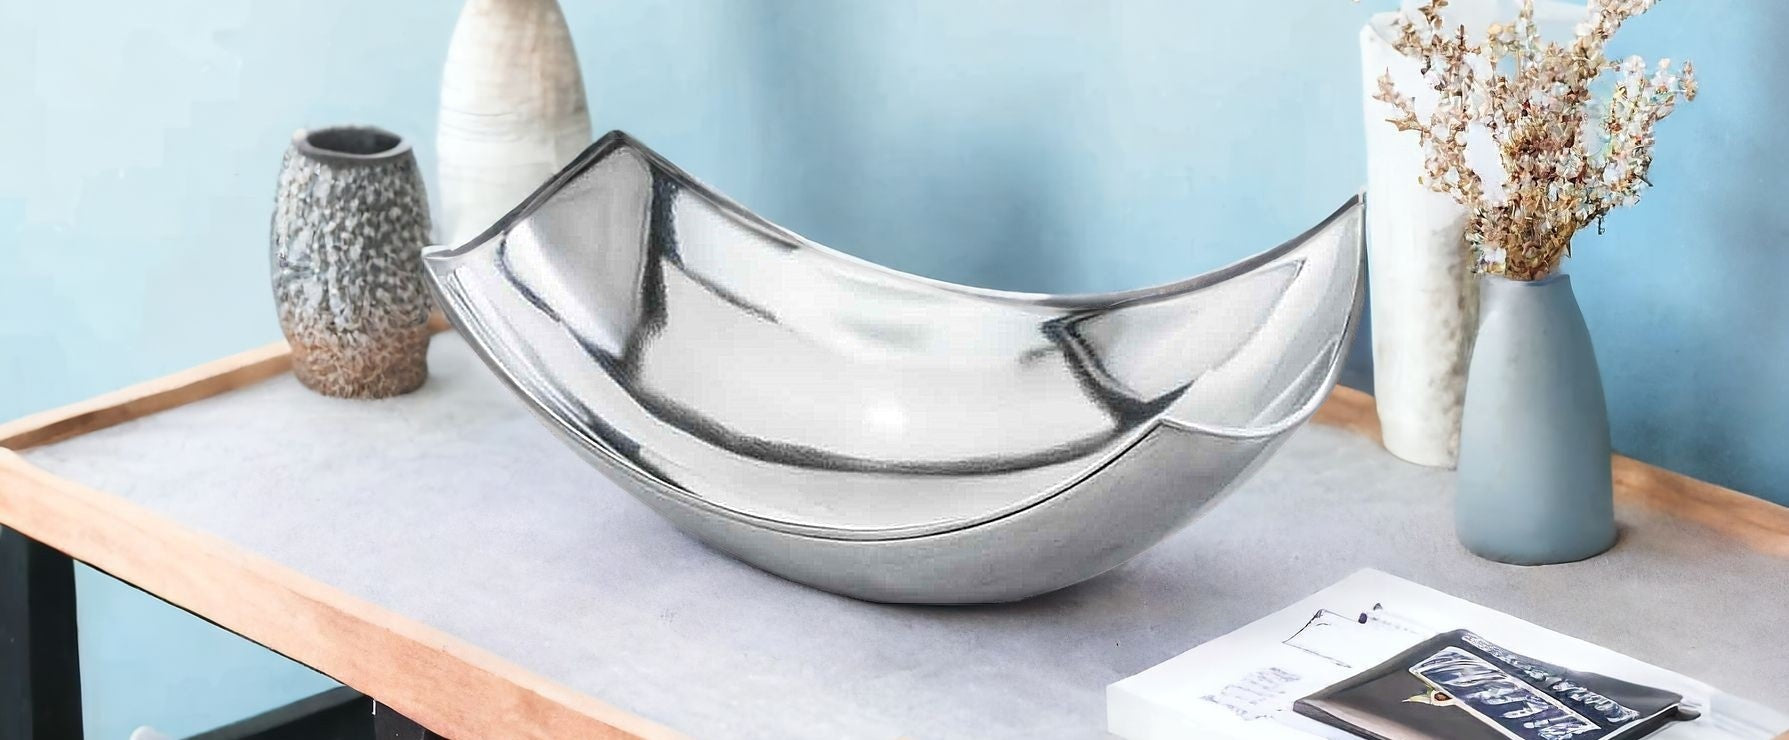 9.75" X 17" X 5.5" Buffed, Silver, Large Scoop Bowl